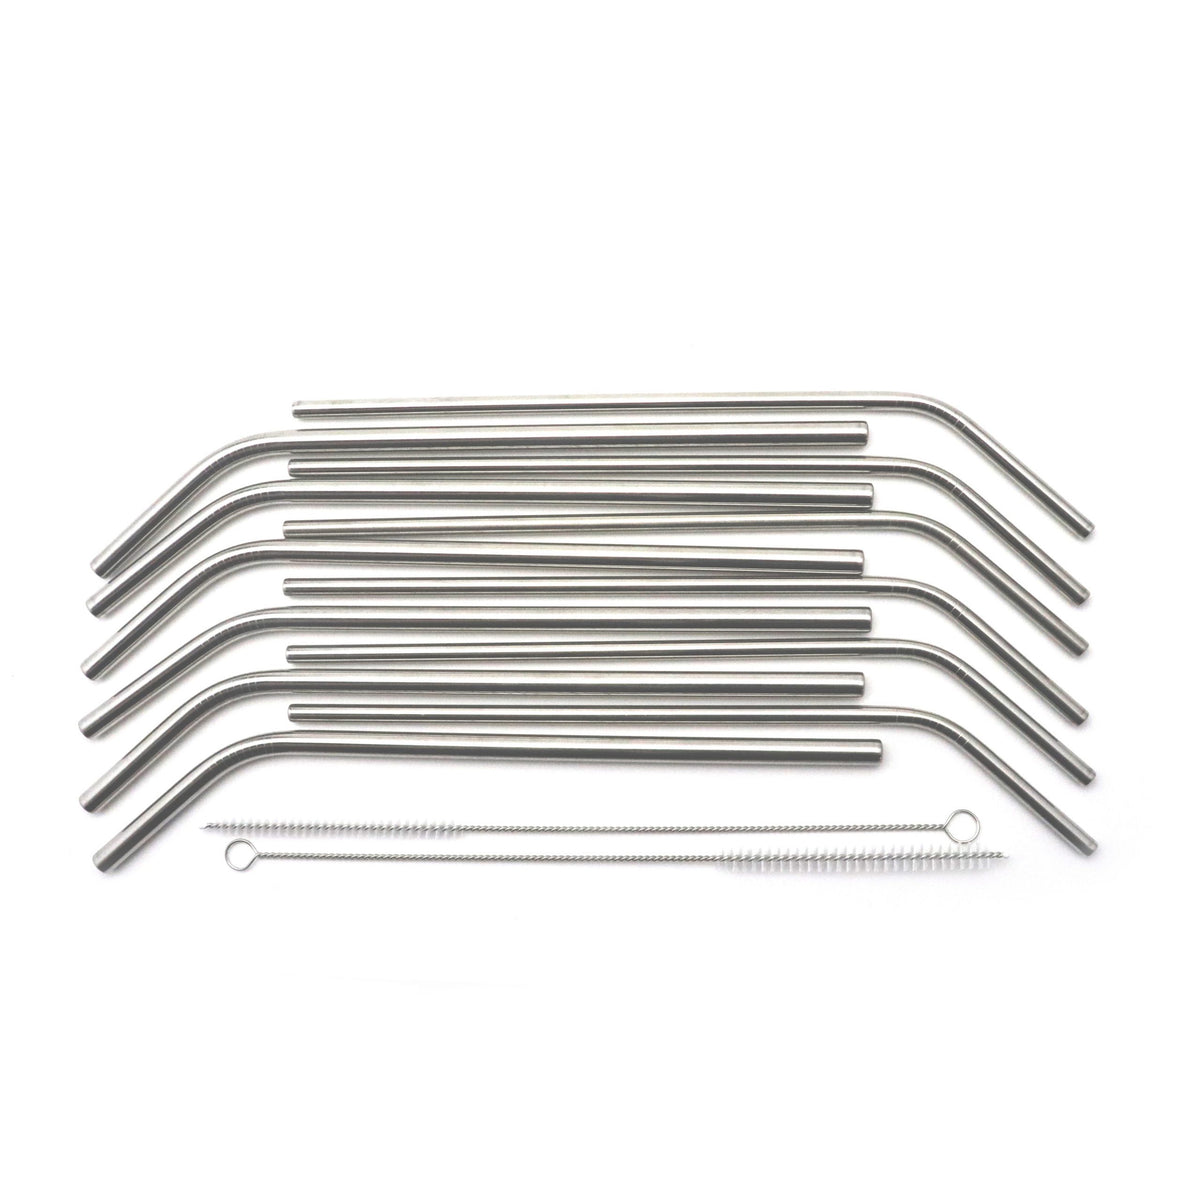 Metal straw set, top view, showing small and large sizes and cleaning brushes.